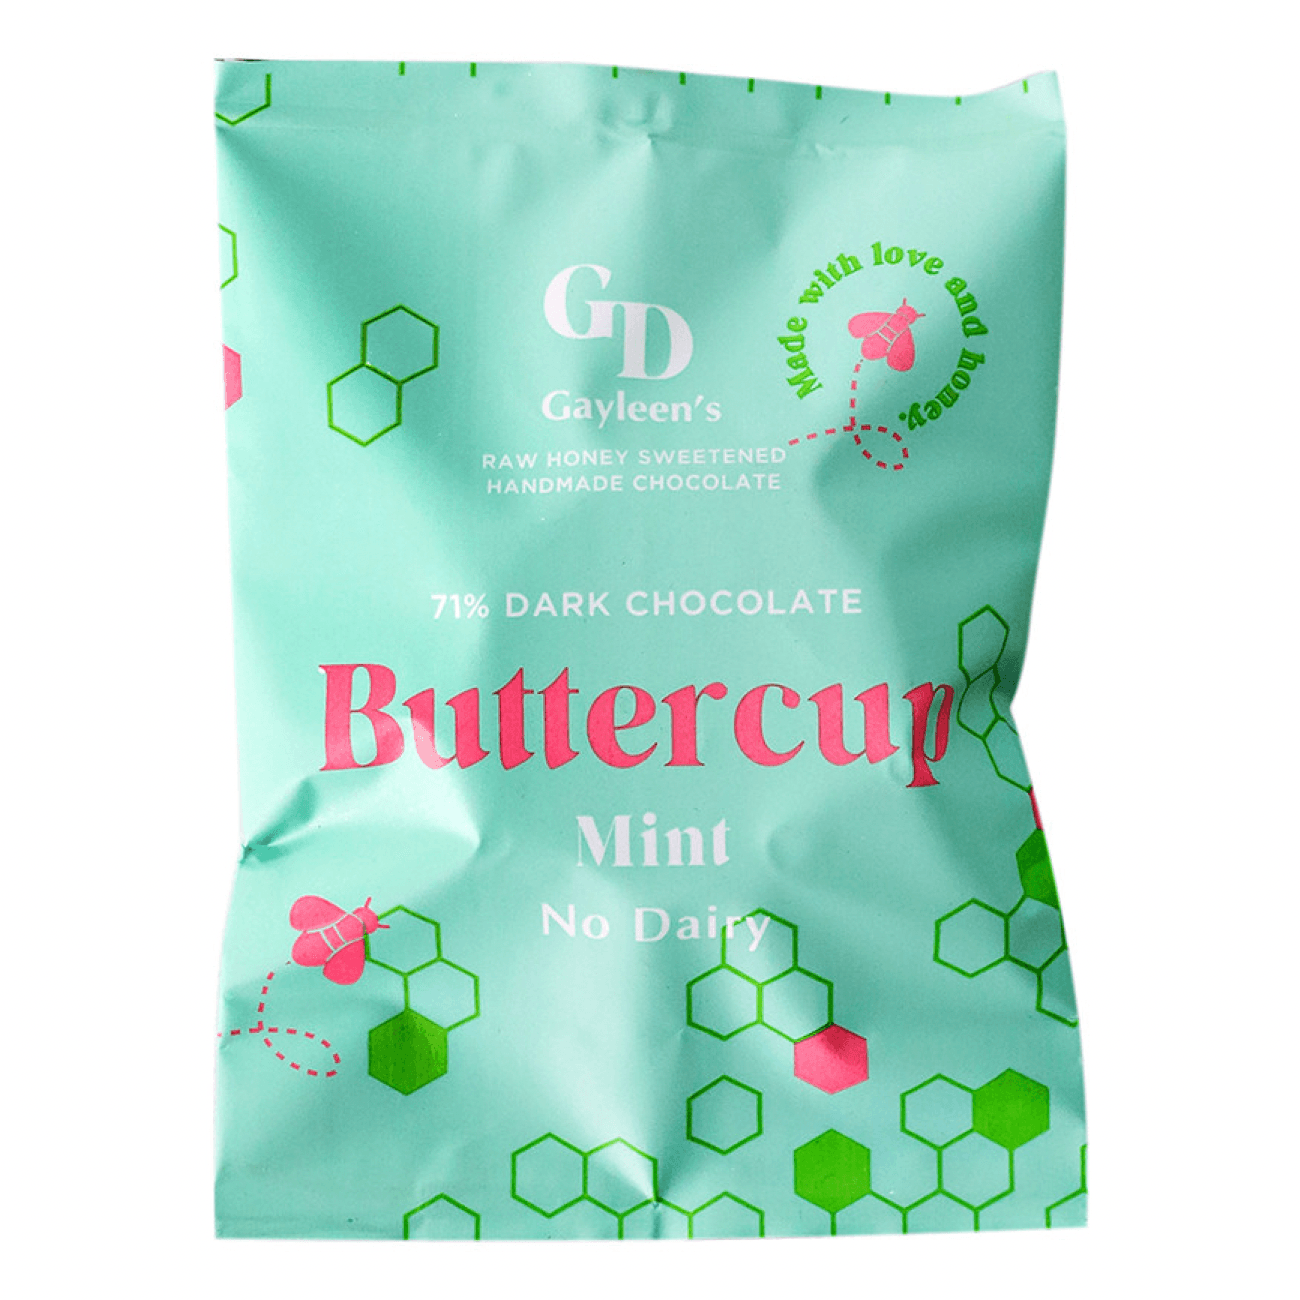 Buttercup Mint 20g - Wildsprout